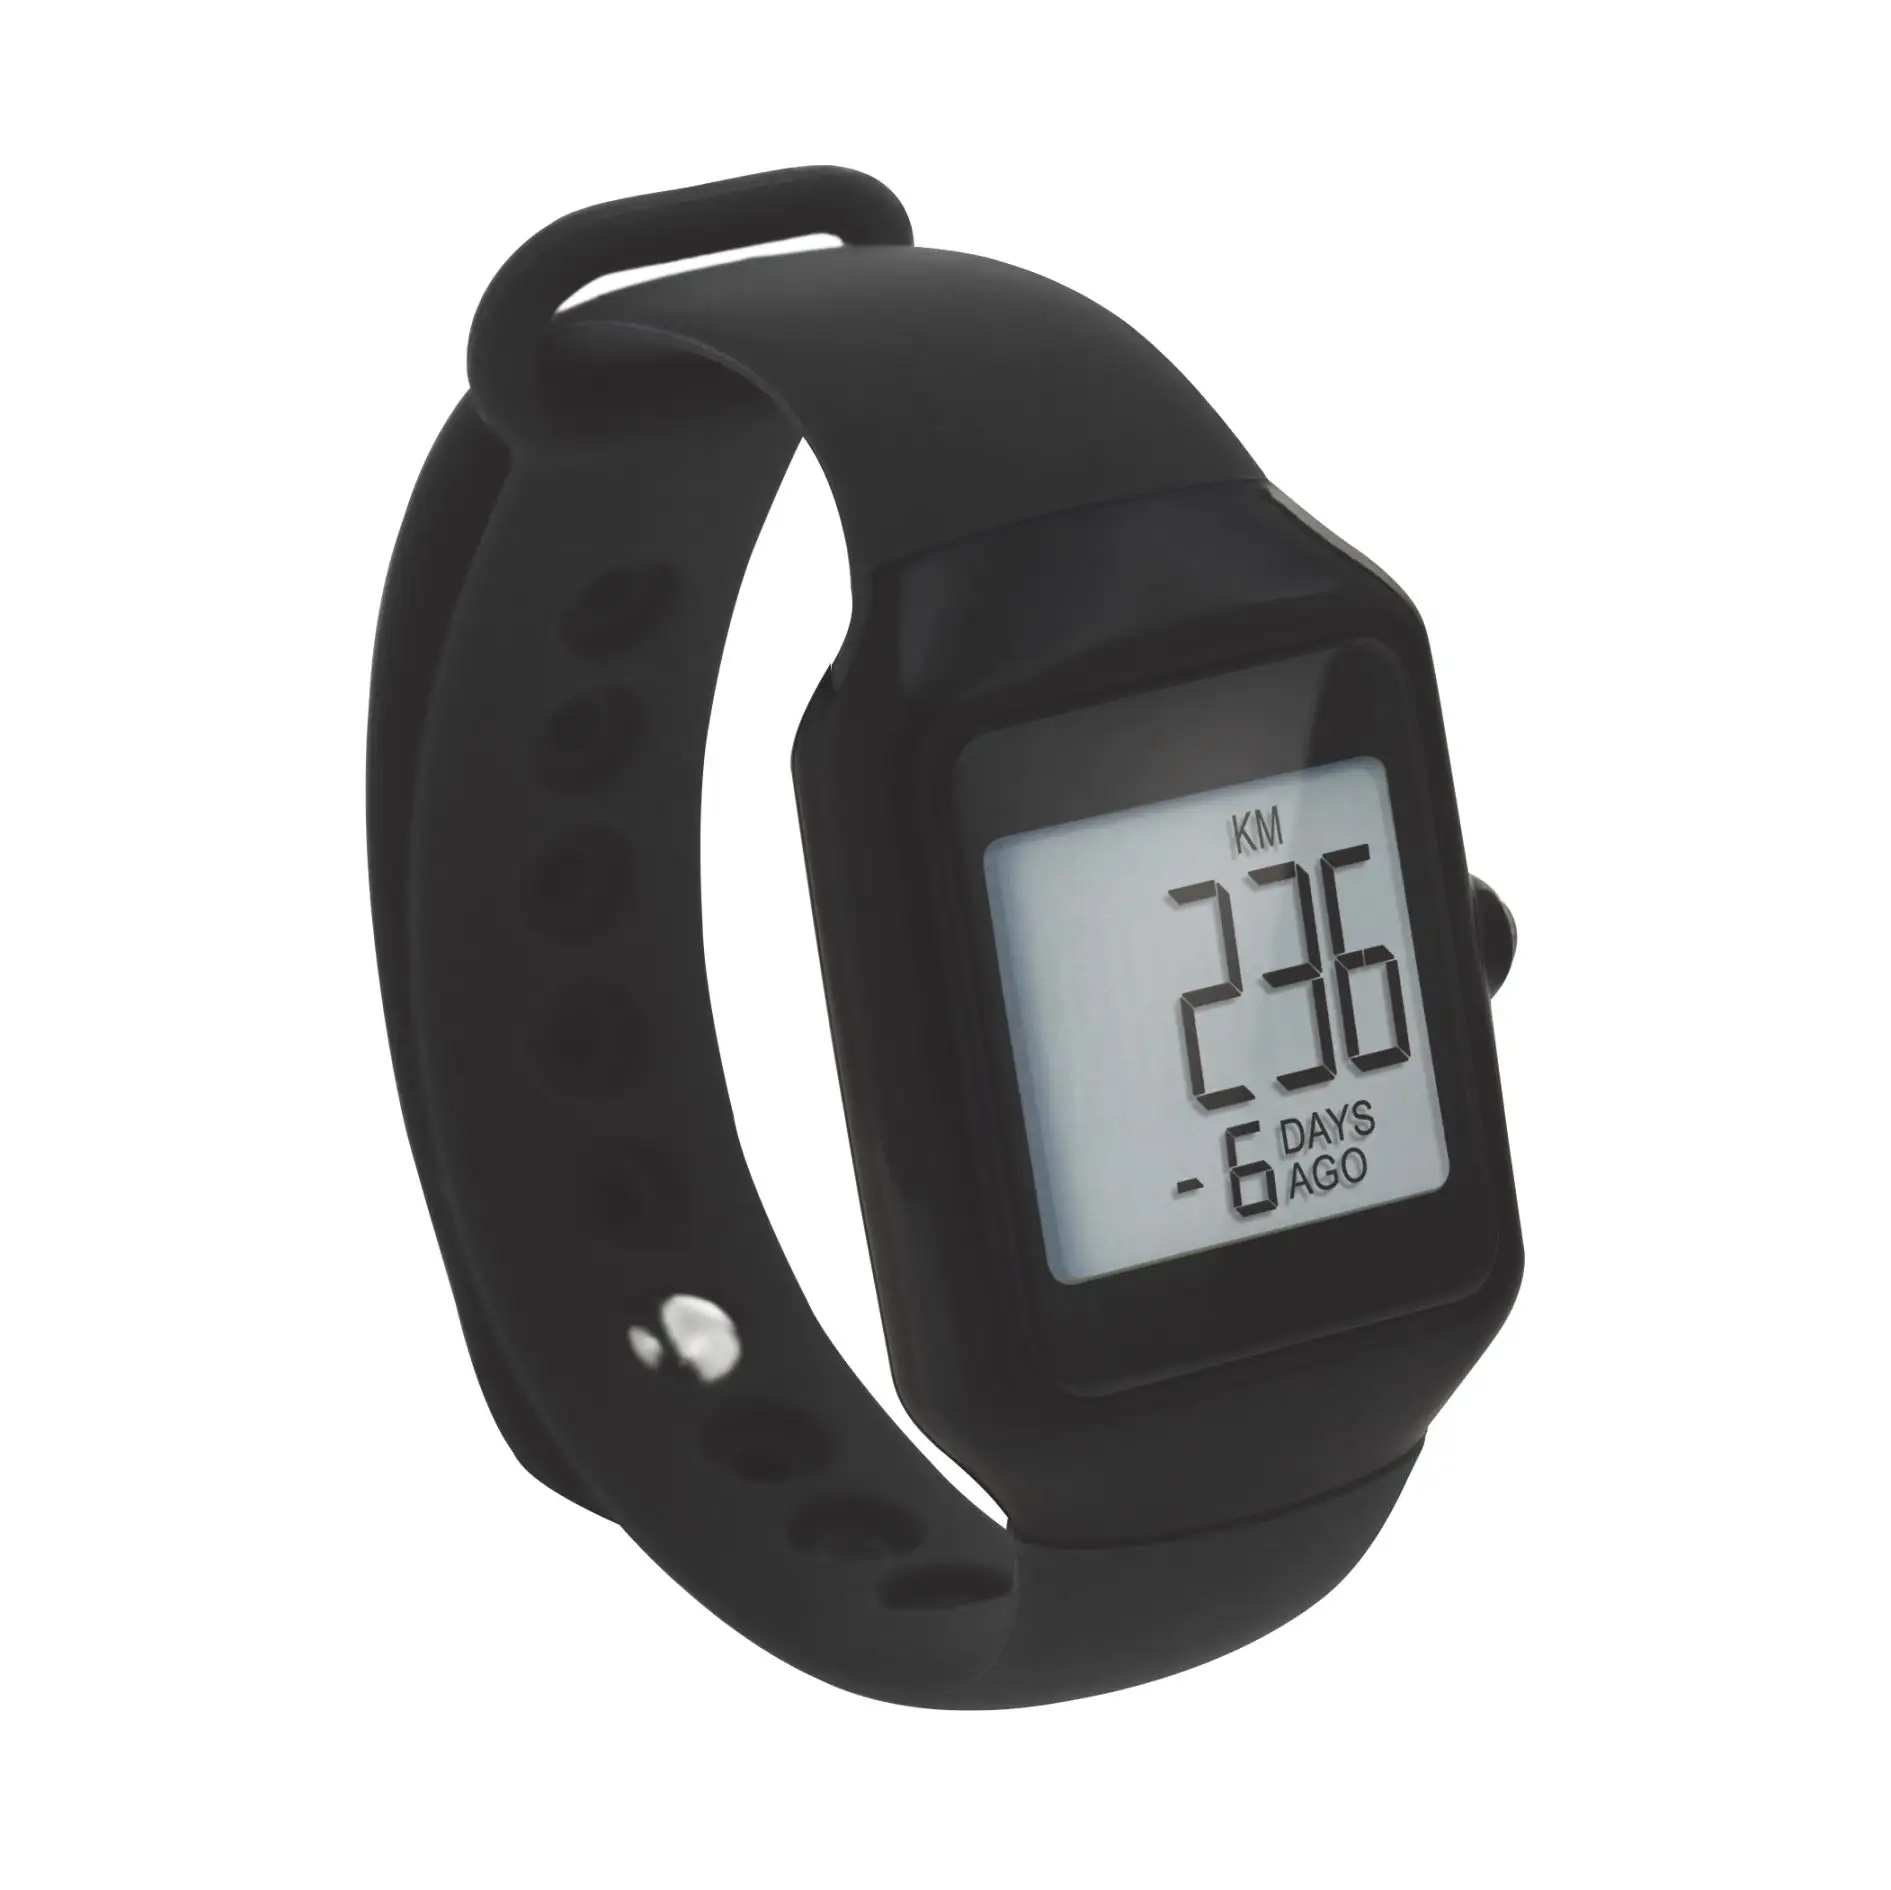 3D Pedometer Watch with one tap mode change function with 14 day Memory